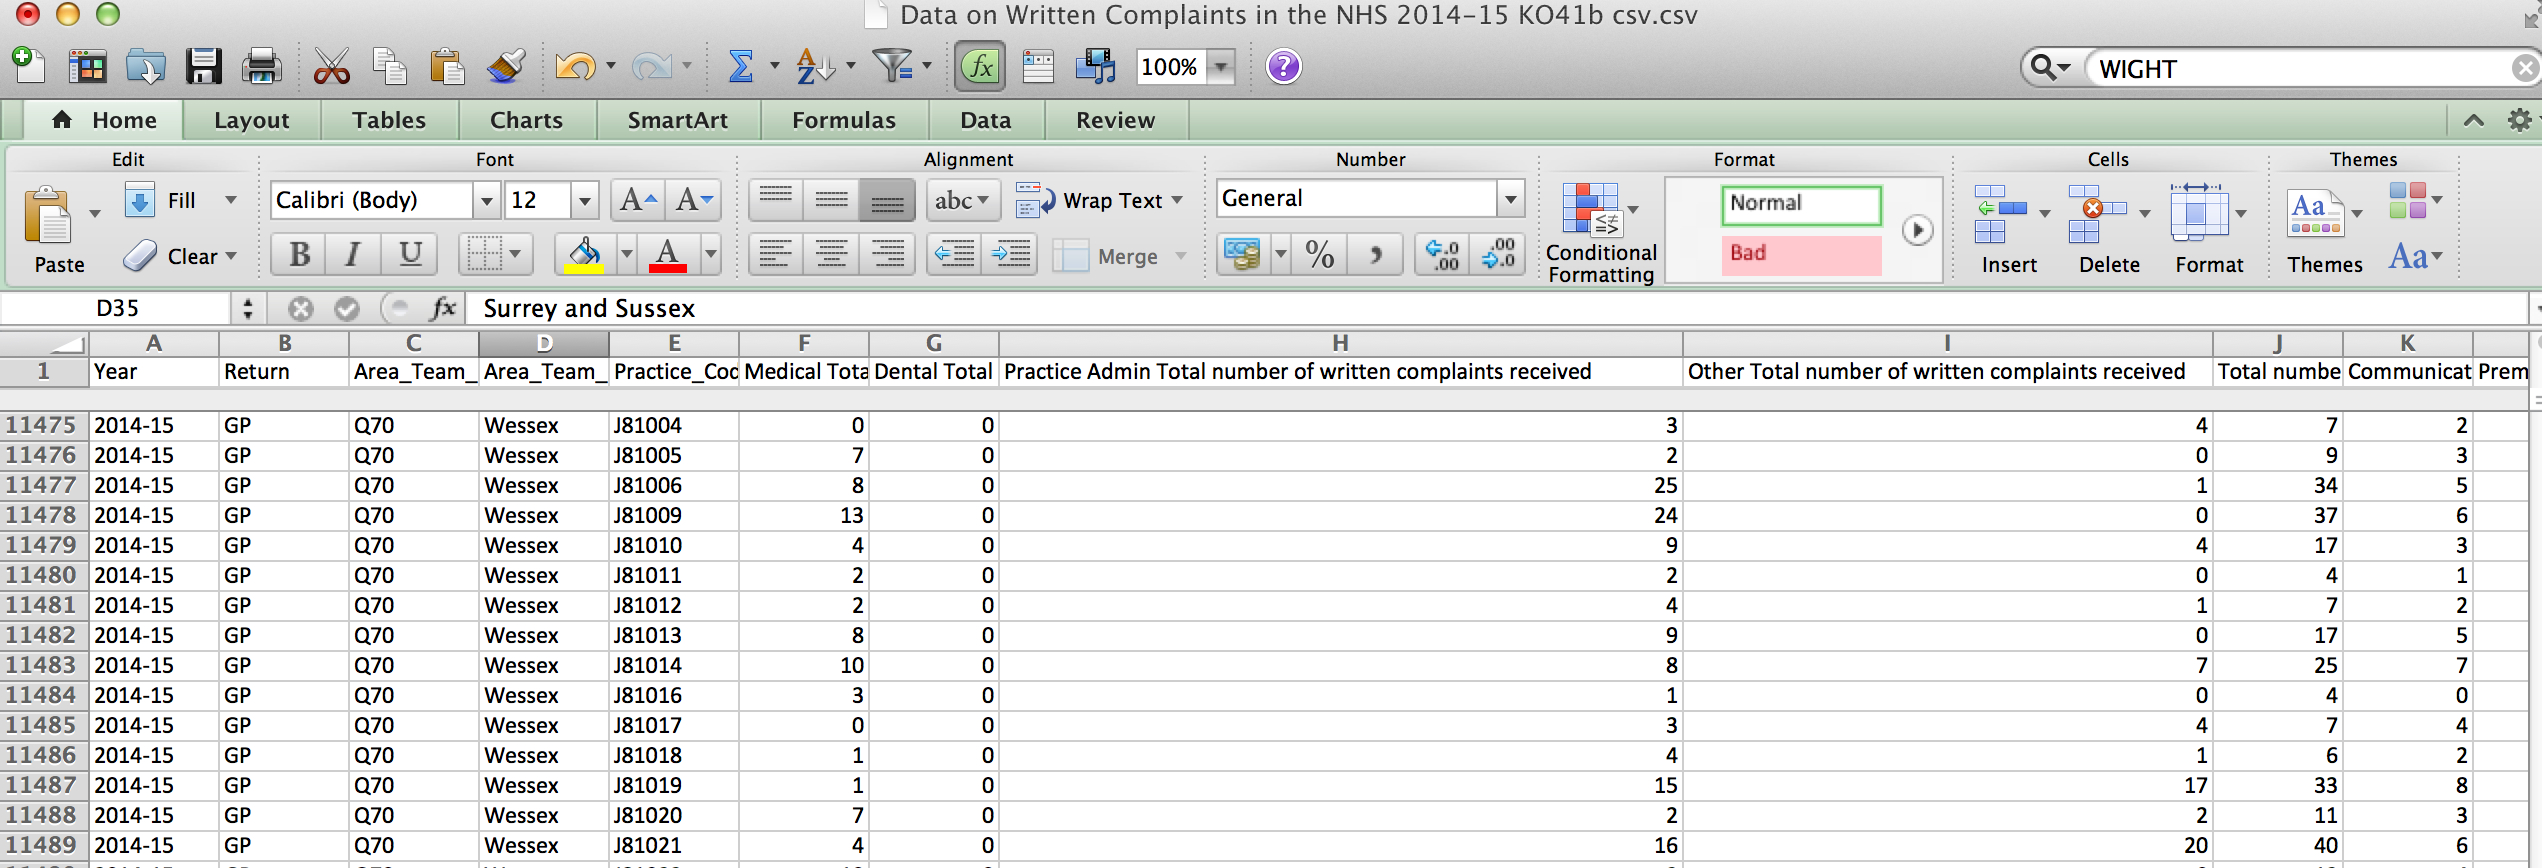 Complaint Tracking Spreadsheet throughout Writing Each Row Of A Spreadsheet As A Press Release ...